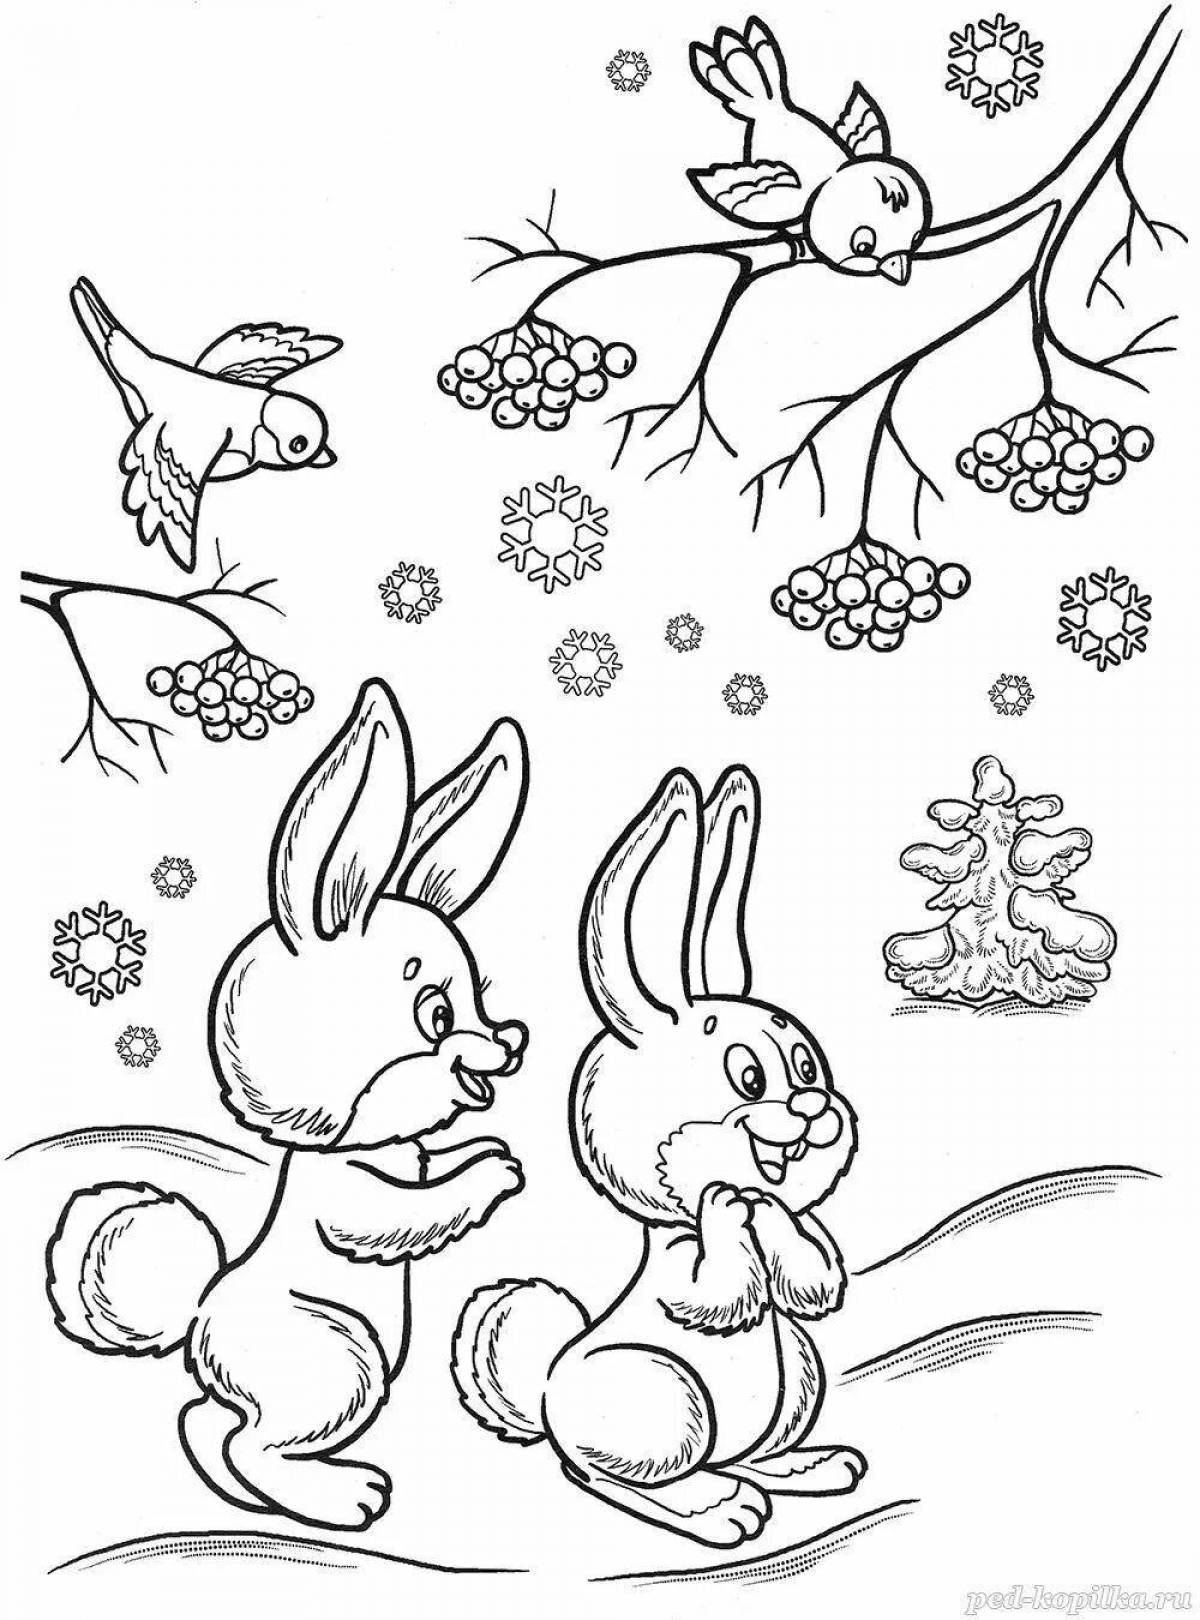 Colorful christmas tree and rabbit coloring book